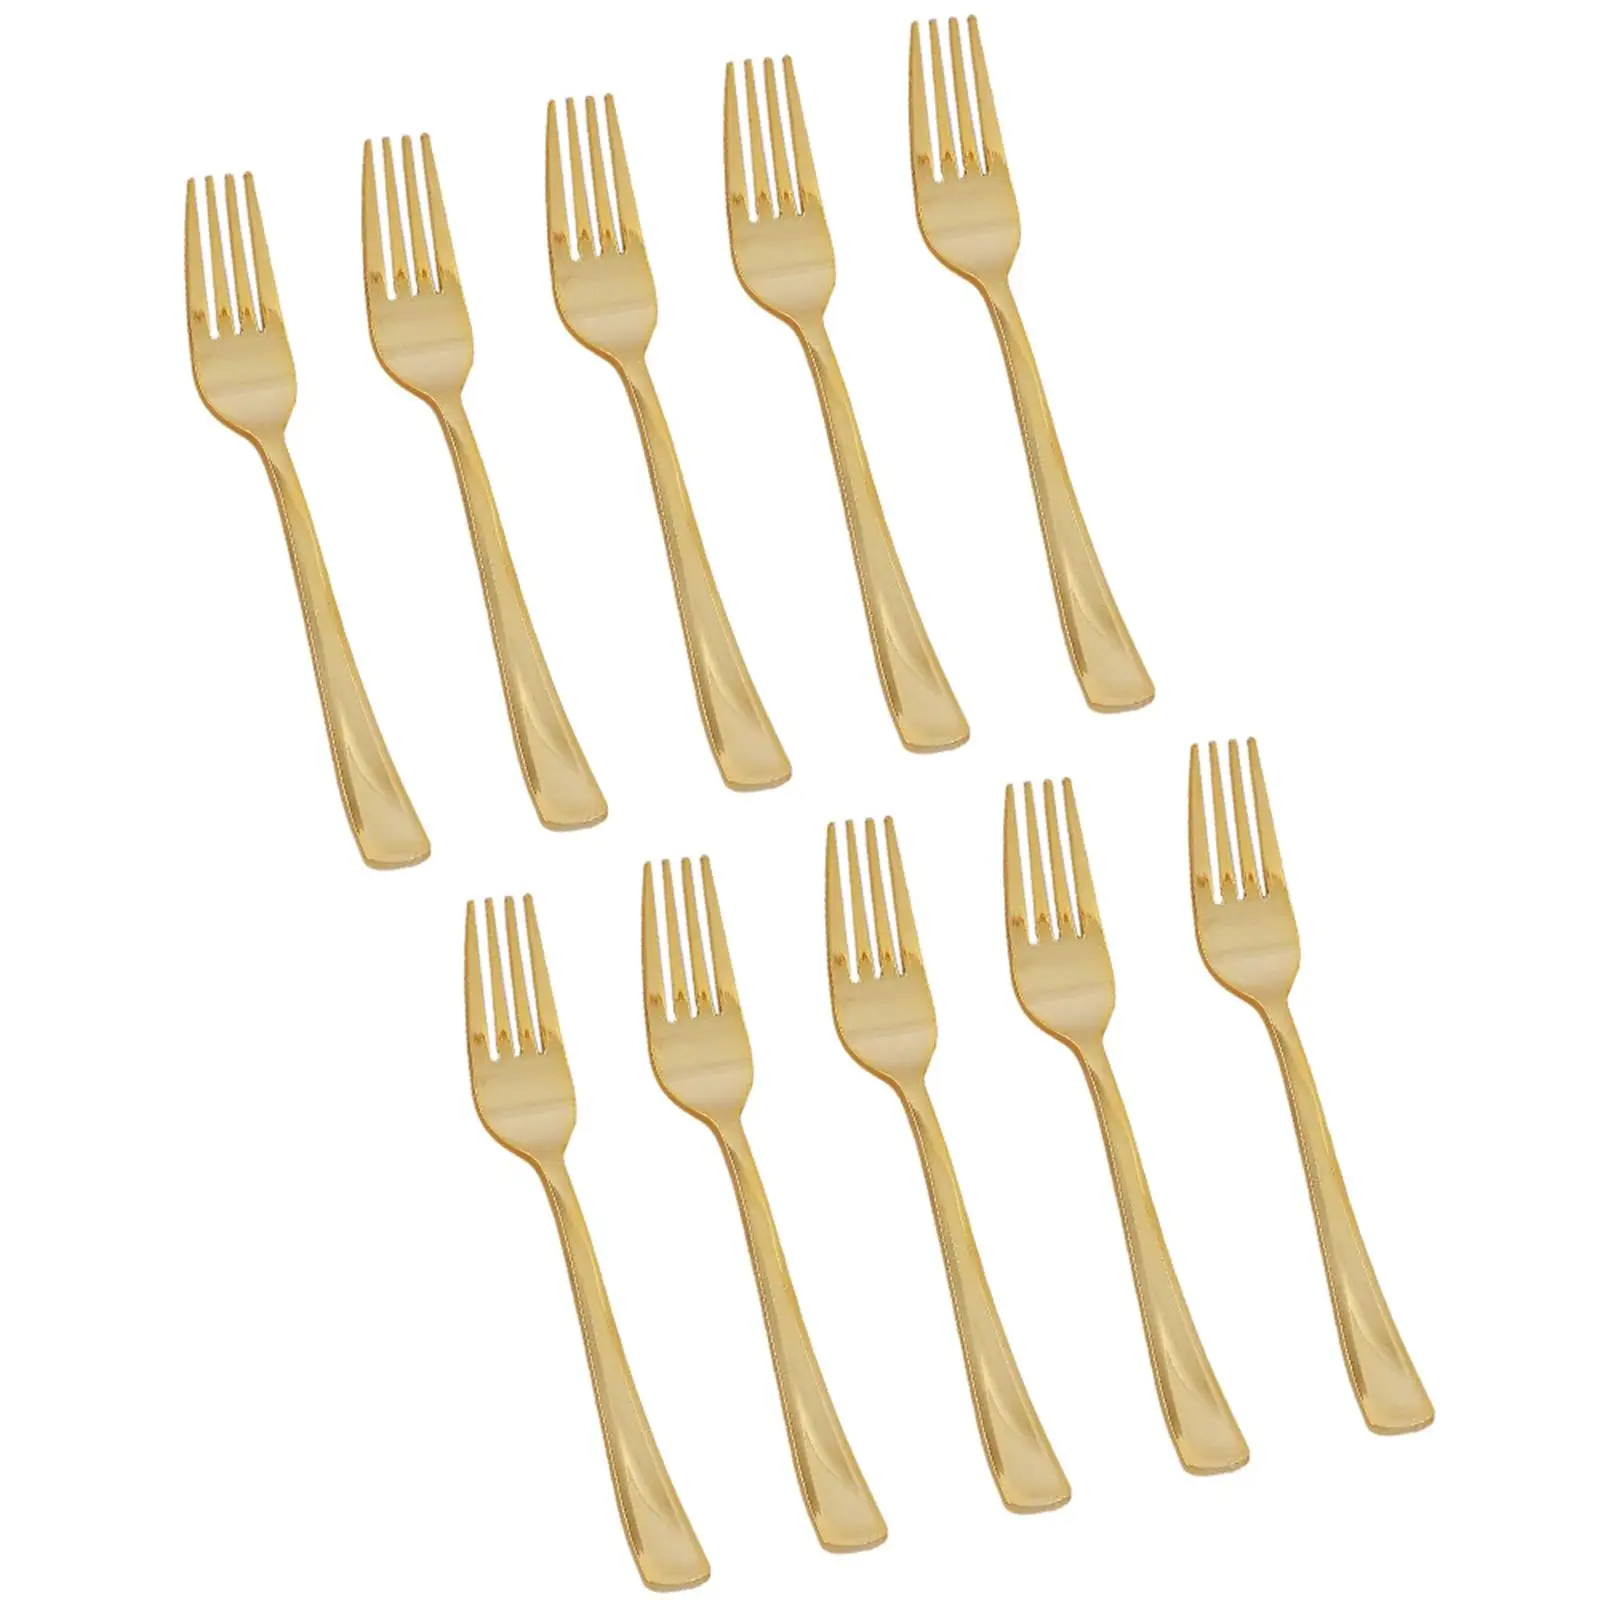 Disposable Tableware Decoration Supplies Sturdy Dinnerware Flatware for Engagement Catering Events Parties Dinners Dessert Shop